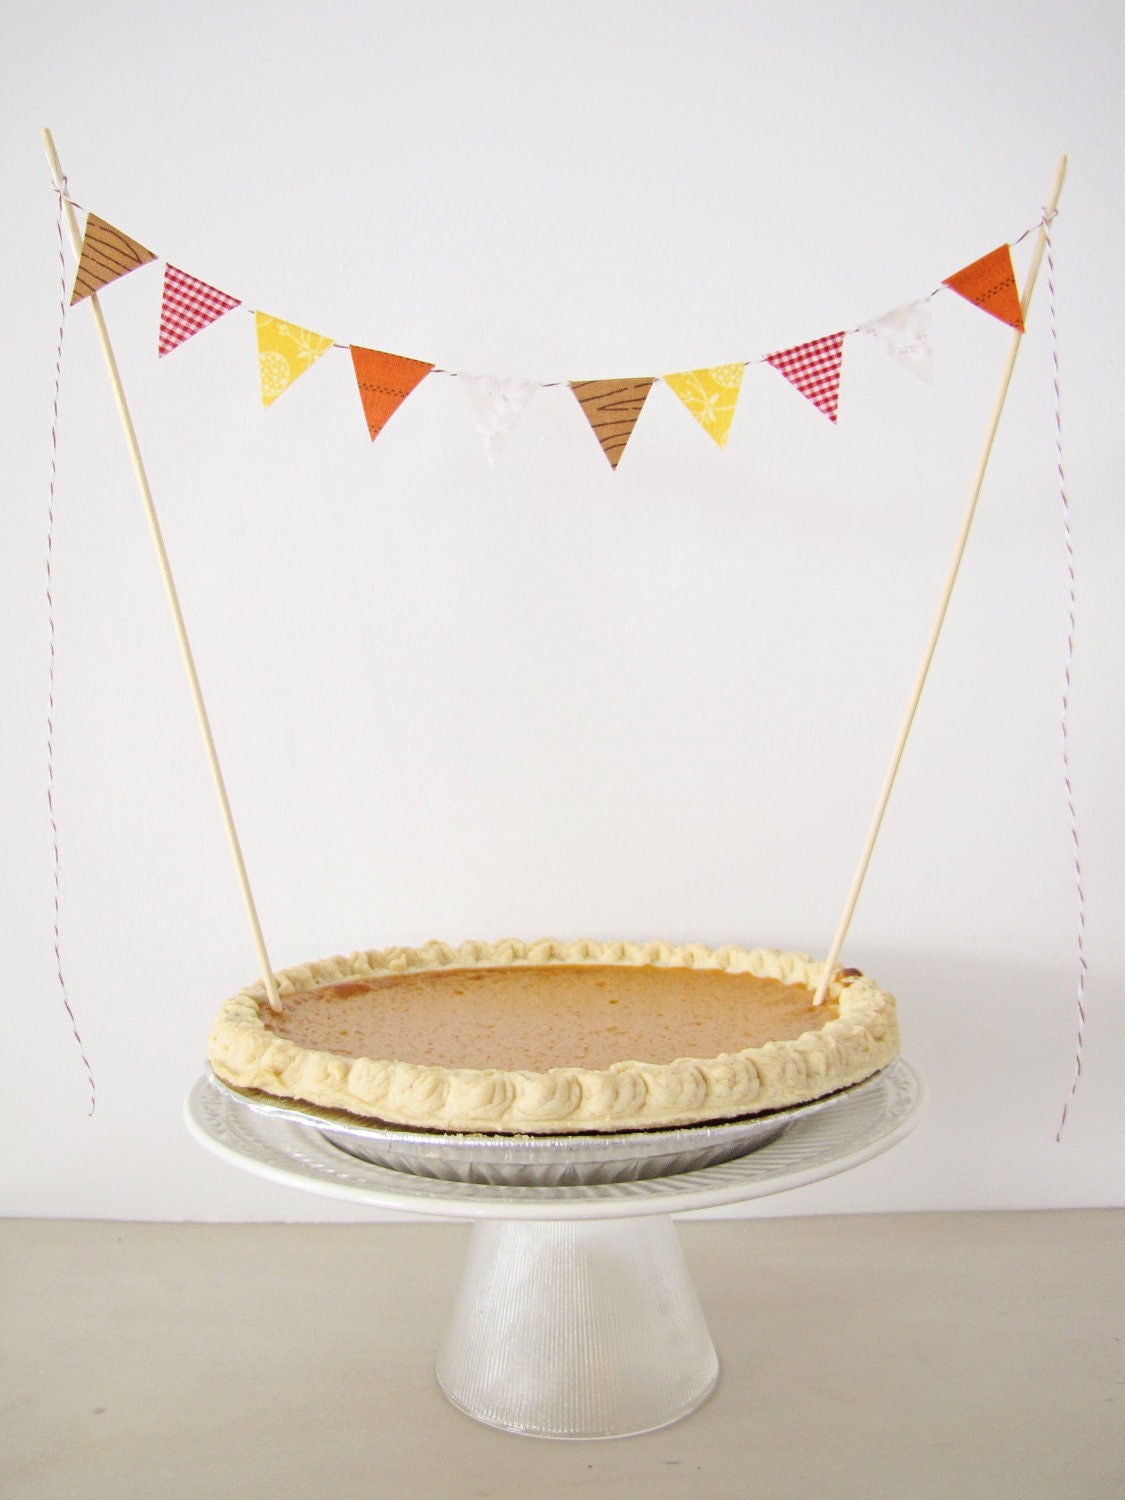 Fabric Cake Bunting Decoration - Cake Topper - Thanksgiving, Fall Wedding, Birthday Party, Shower Decor in autumn harvest